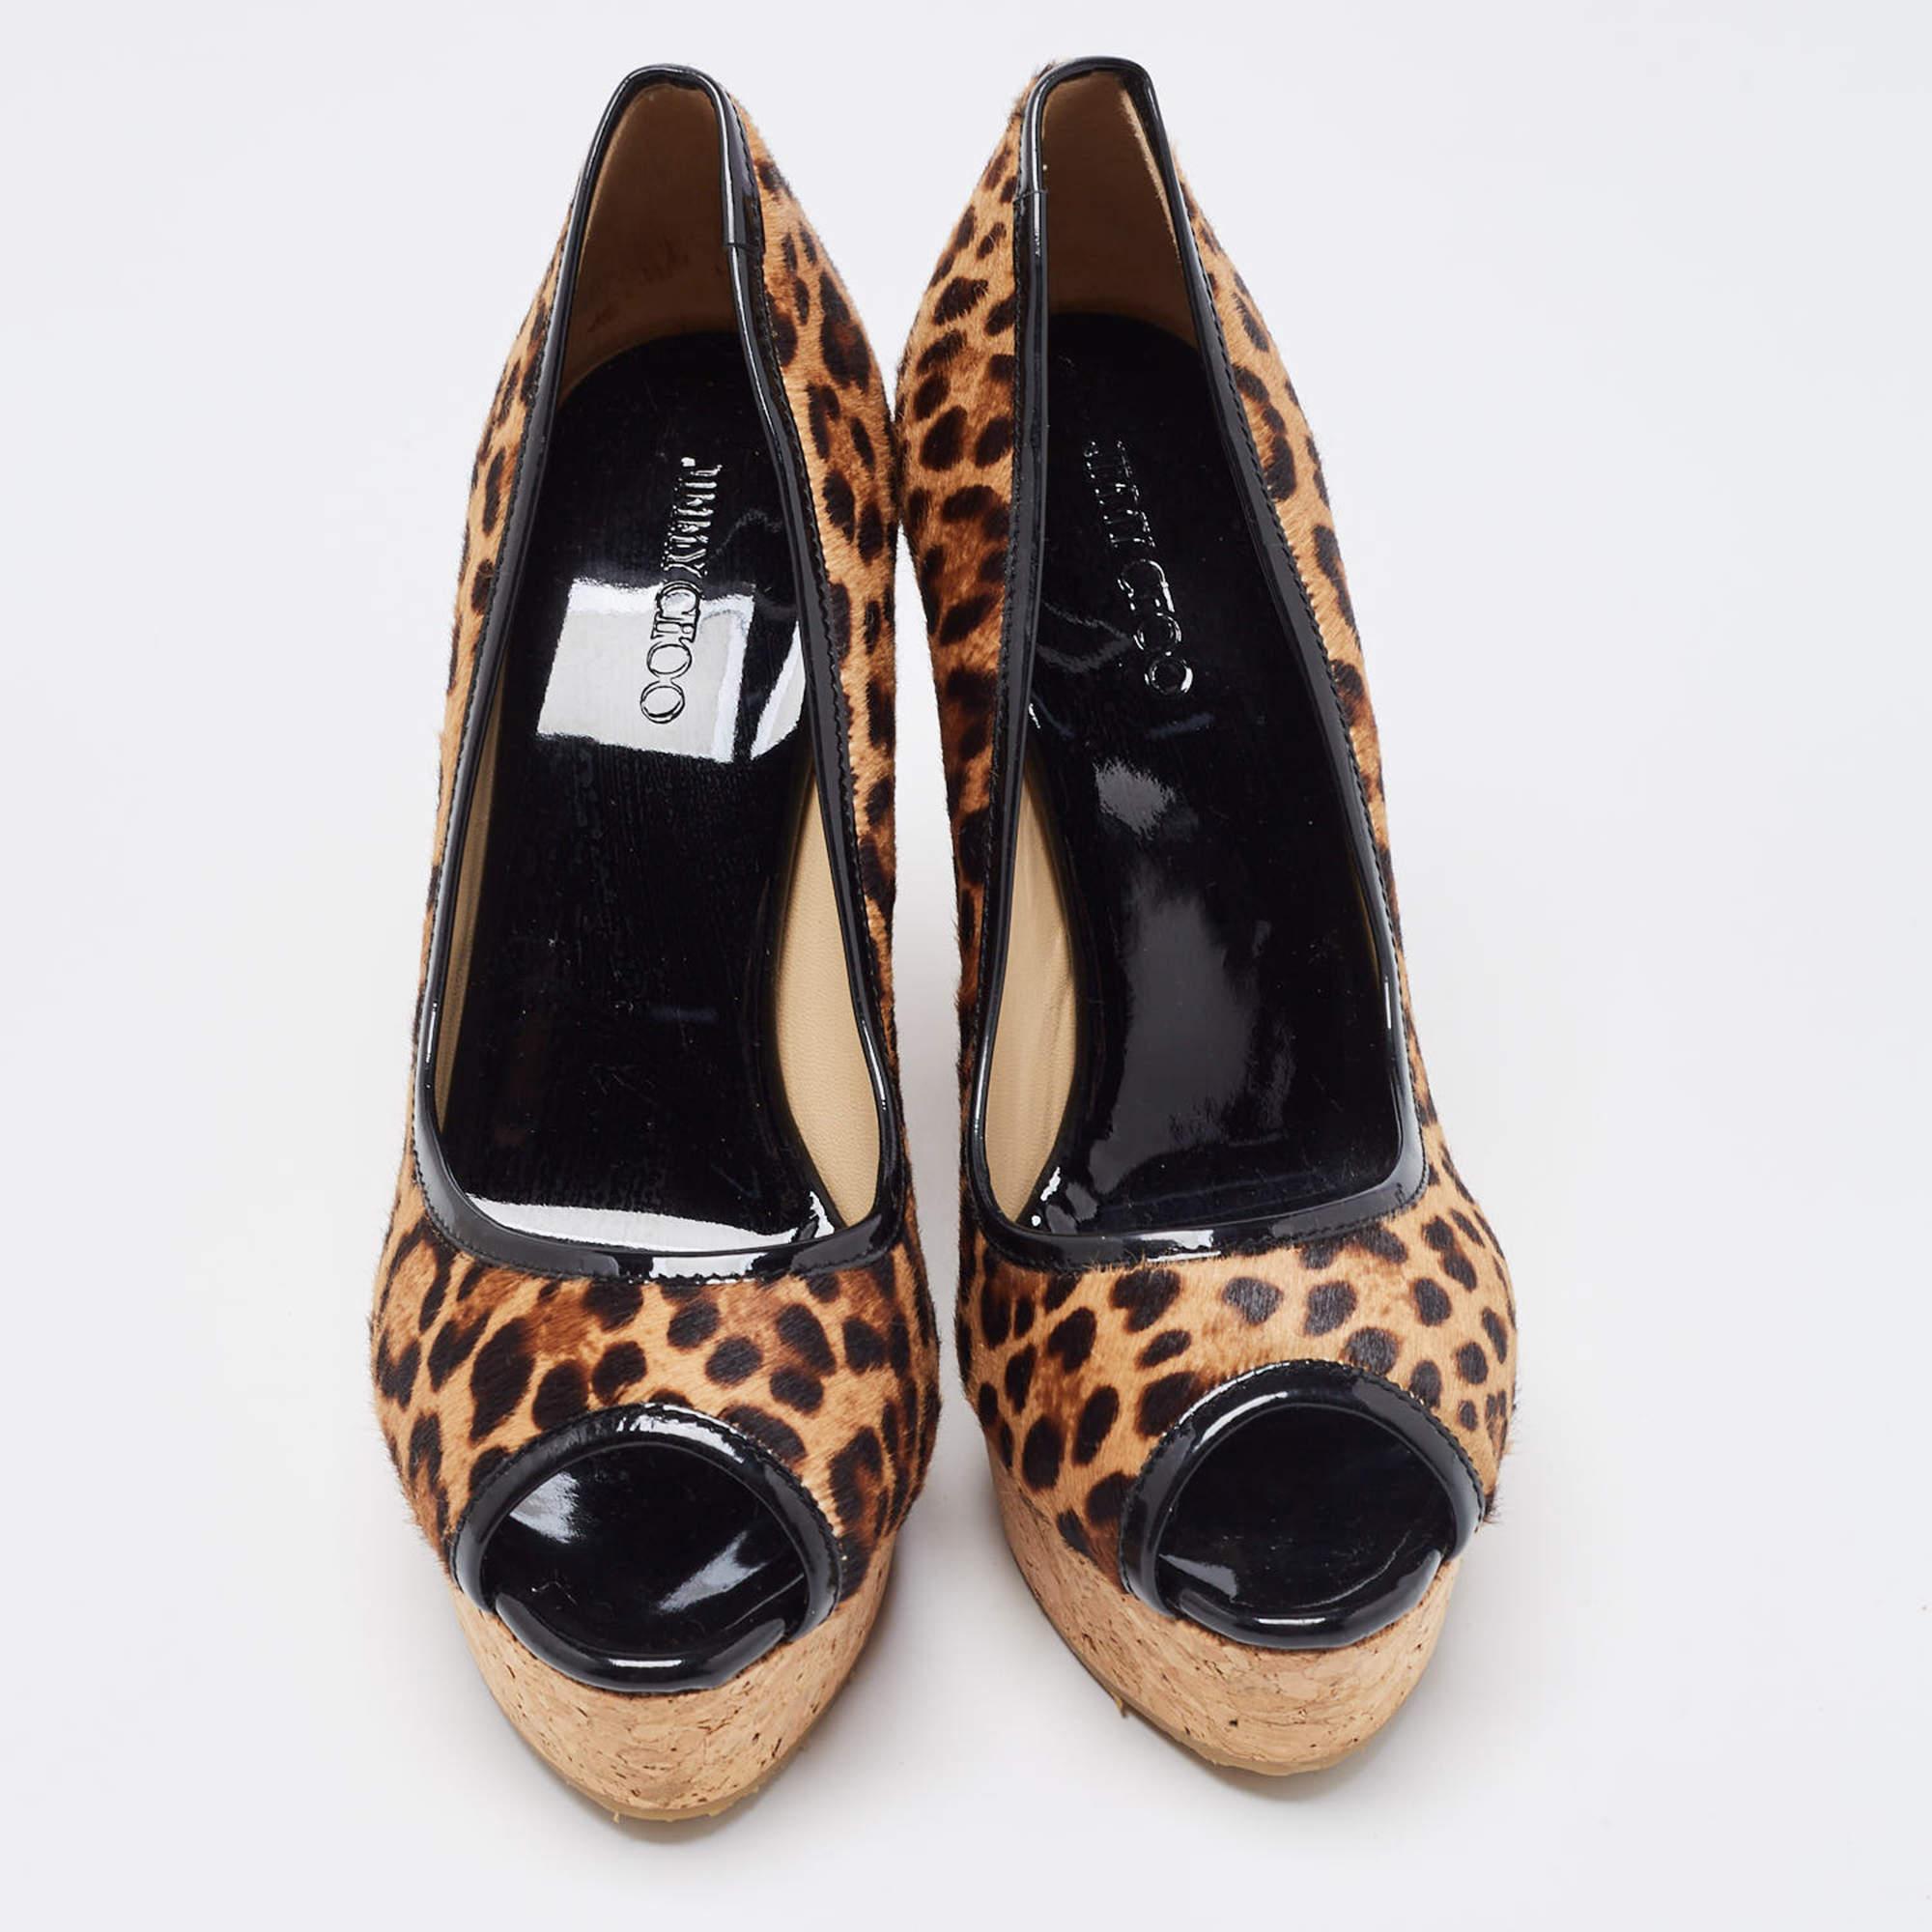 Make a chic style statement with these Jimmy Choo wedge pumps. They showcase sturdy heels and durable soles, perfect for your fashionable outings!

Includes
Original Box, Info Booklet